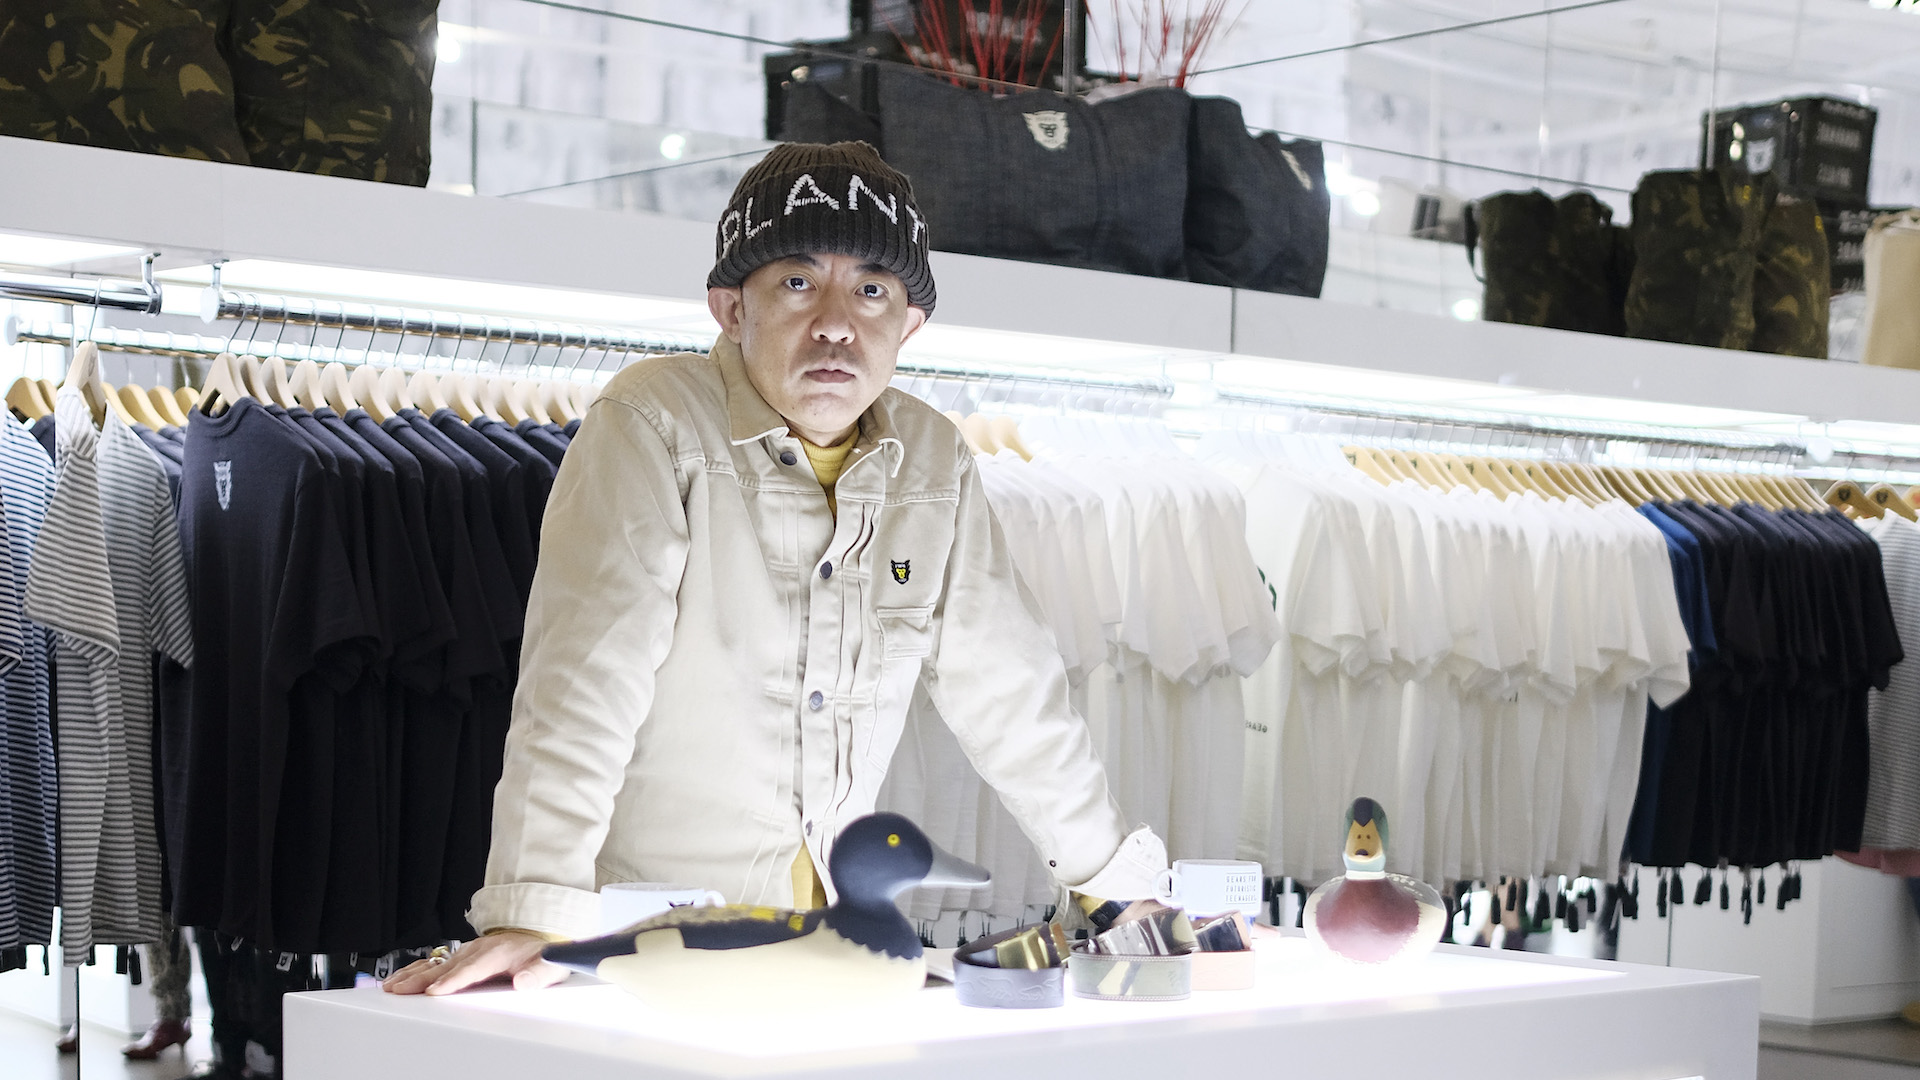 A First Look at Nigo's Kenzo, Where the Clothing is the Star of